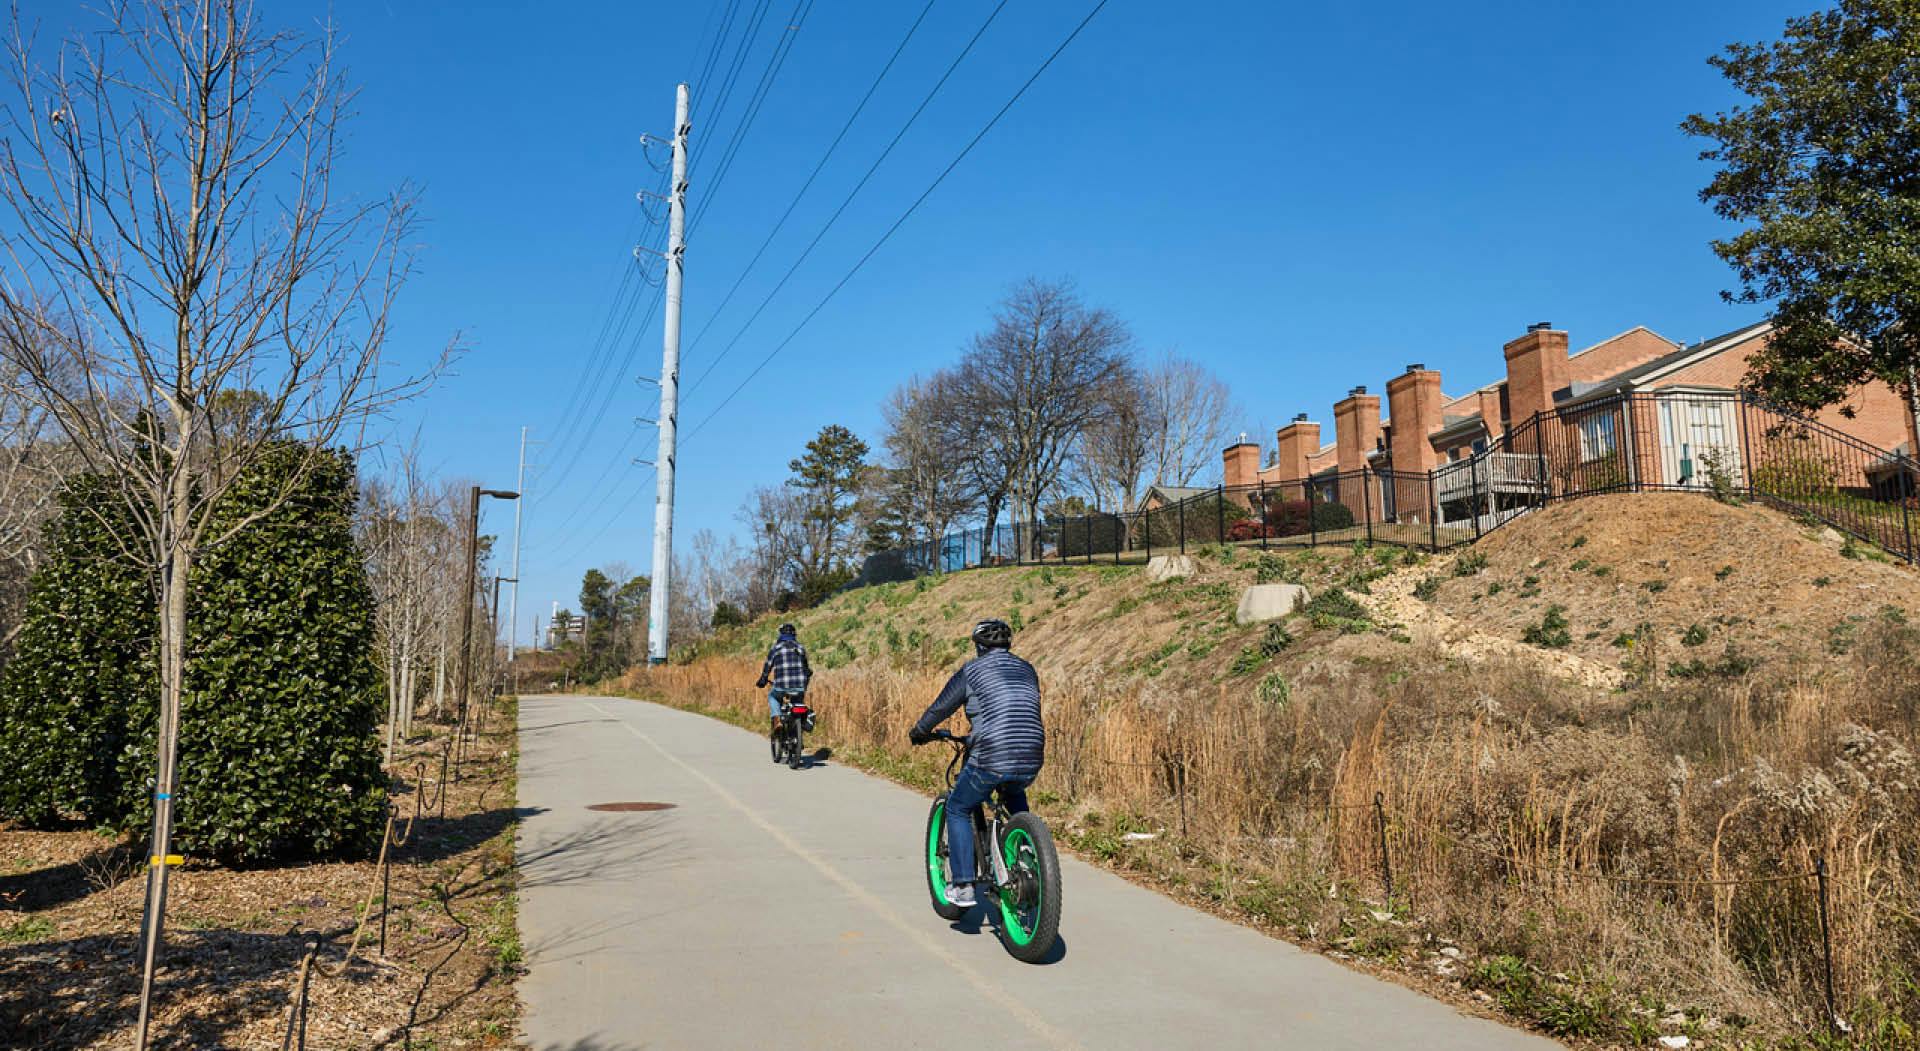 Cyclists ride by condos on the Northeast Trail. (Photo Credit: Erin Sintos)